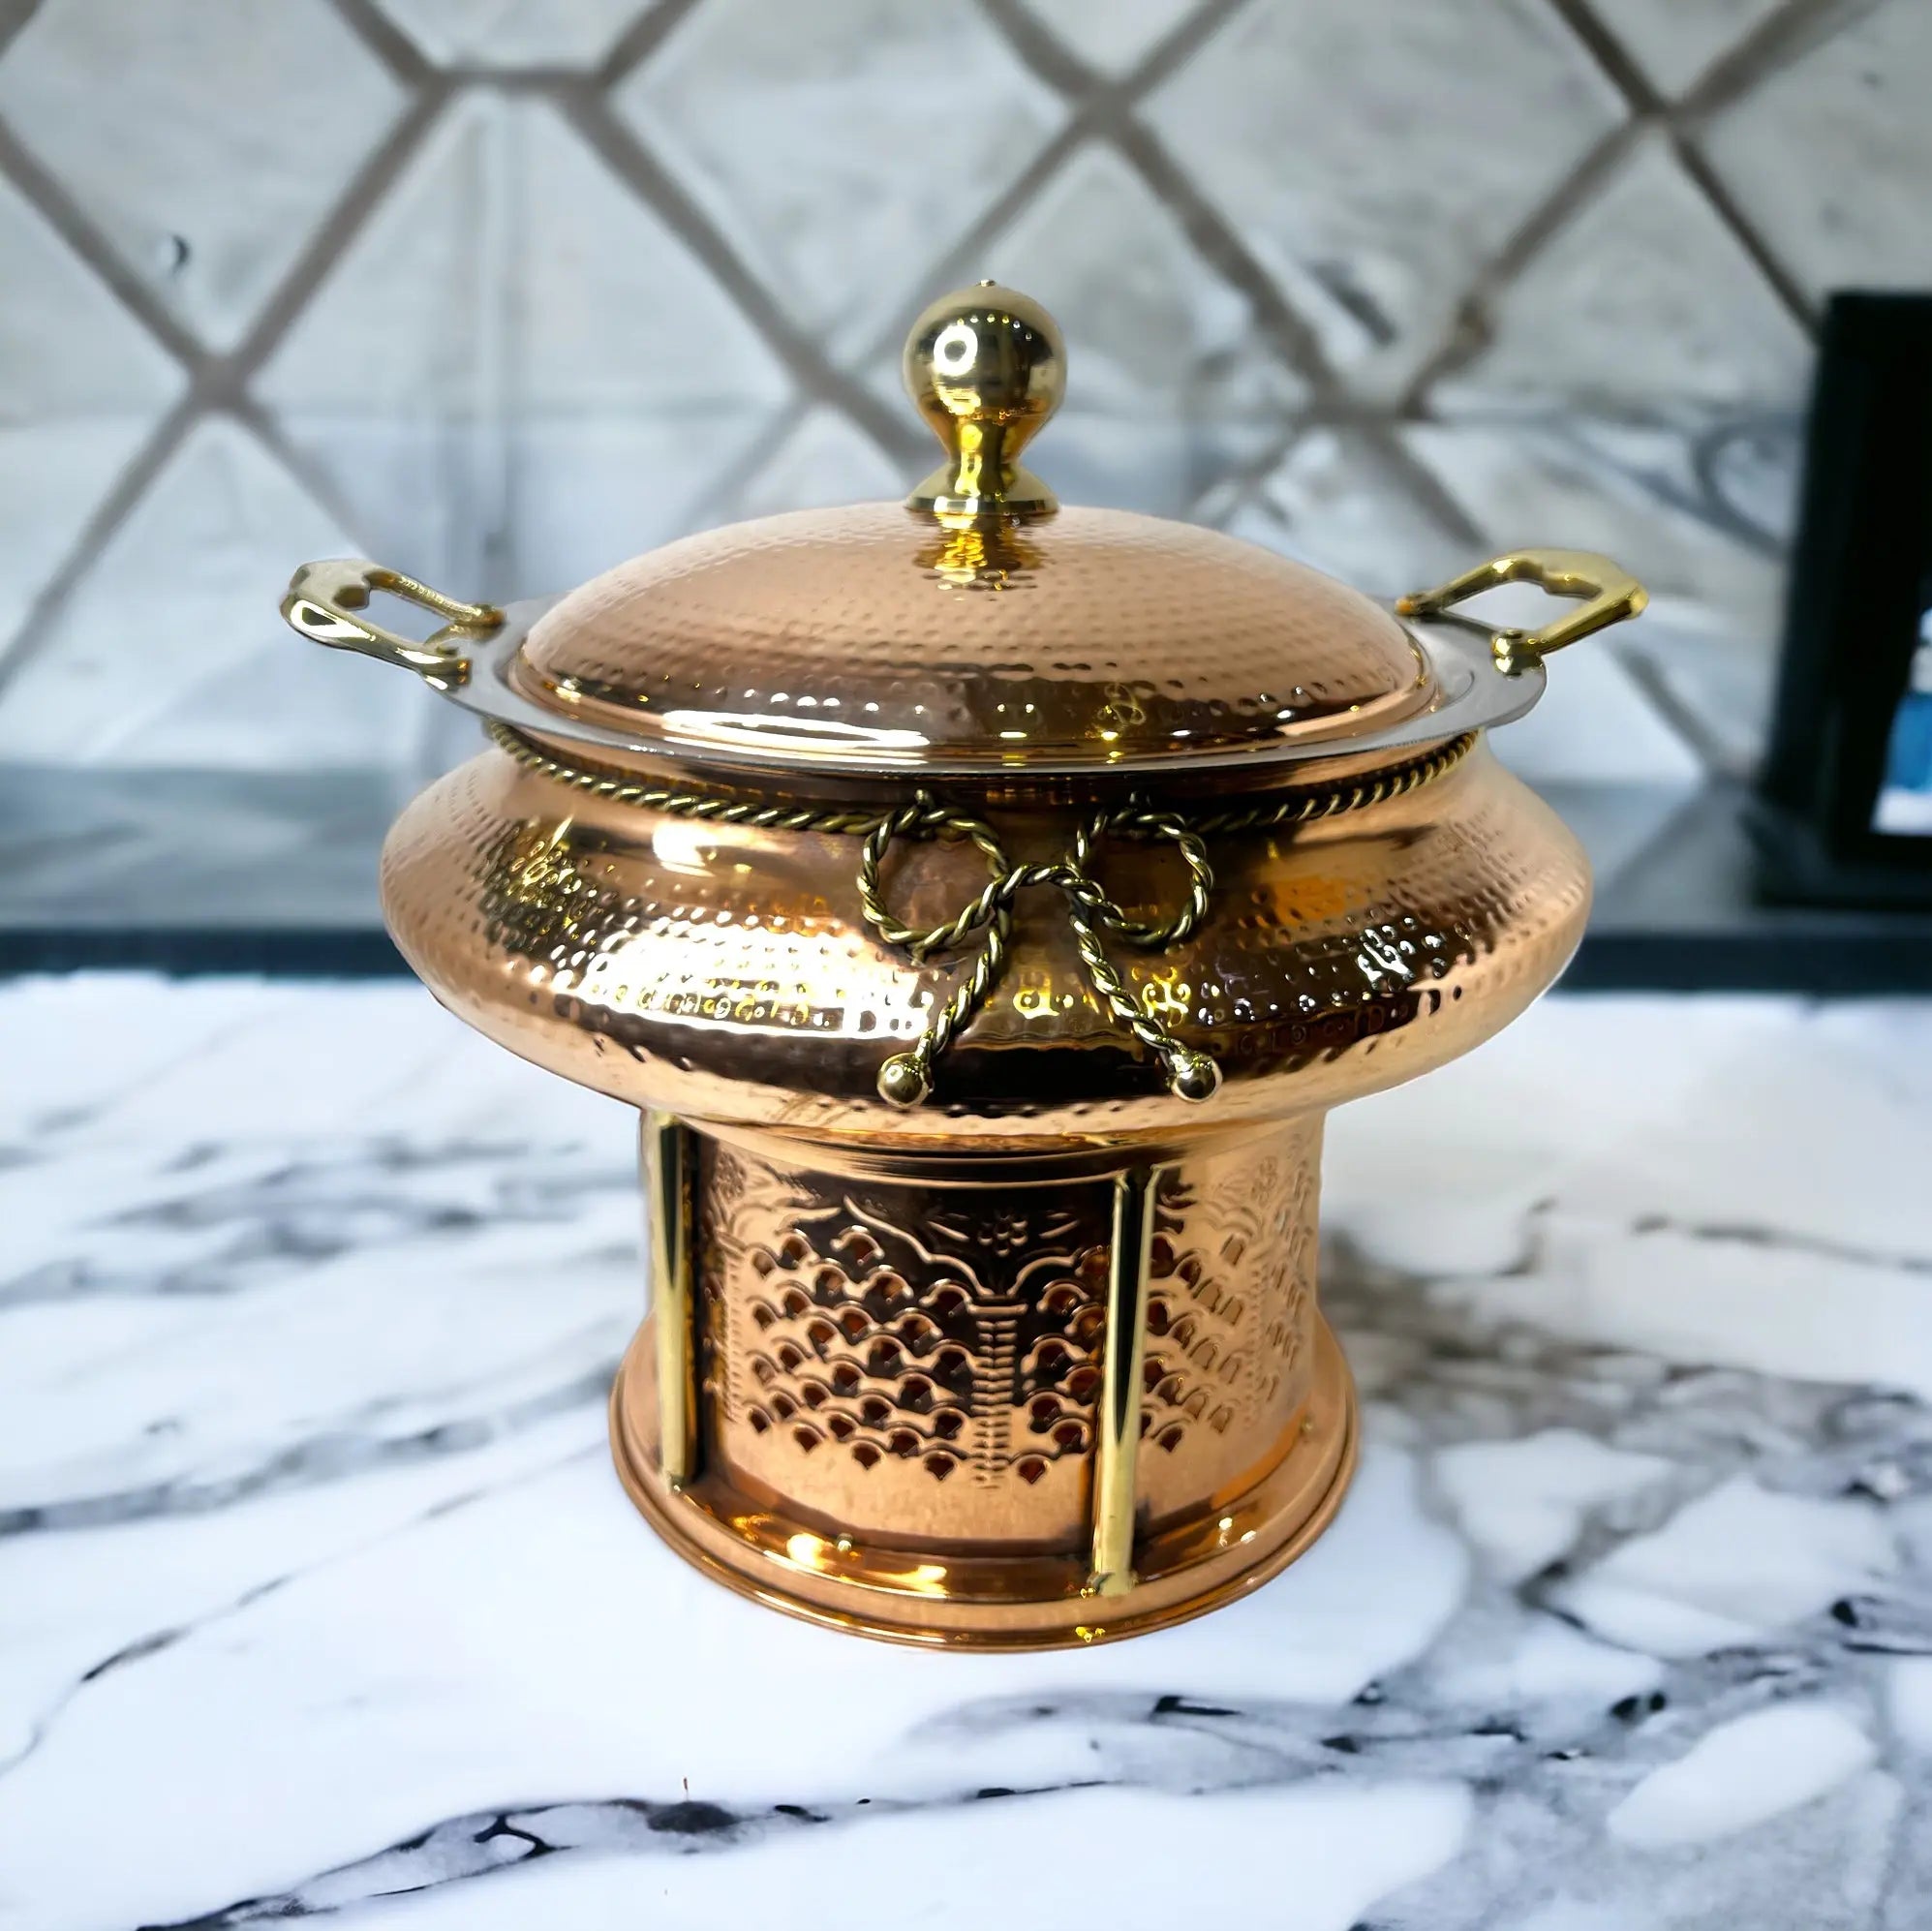 Crockery Wala And Company Copper Steel Chafing dish with traditional Indian rich look - CROCKERY WALA AND COMPANY 